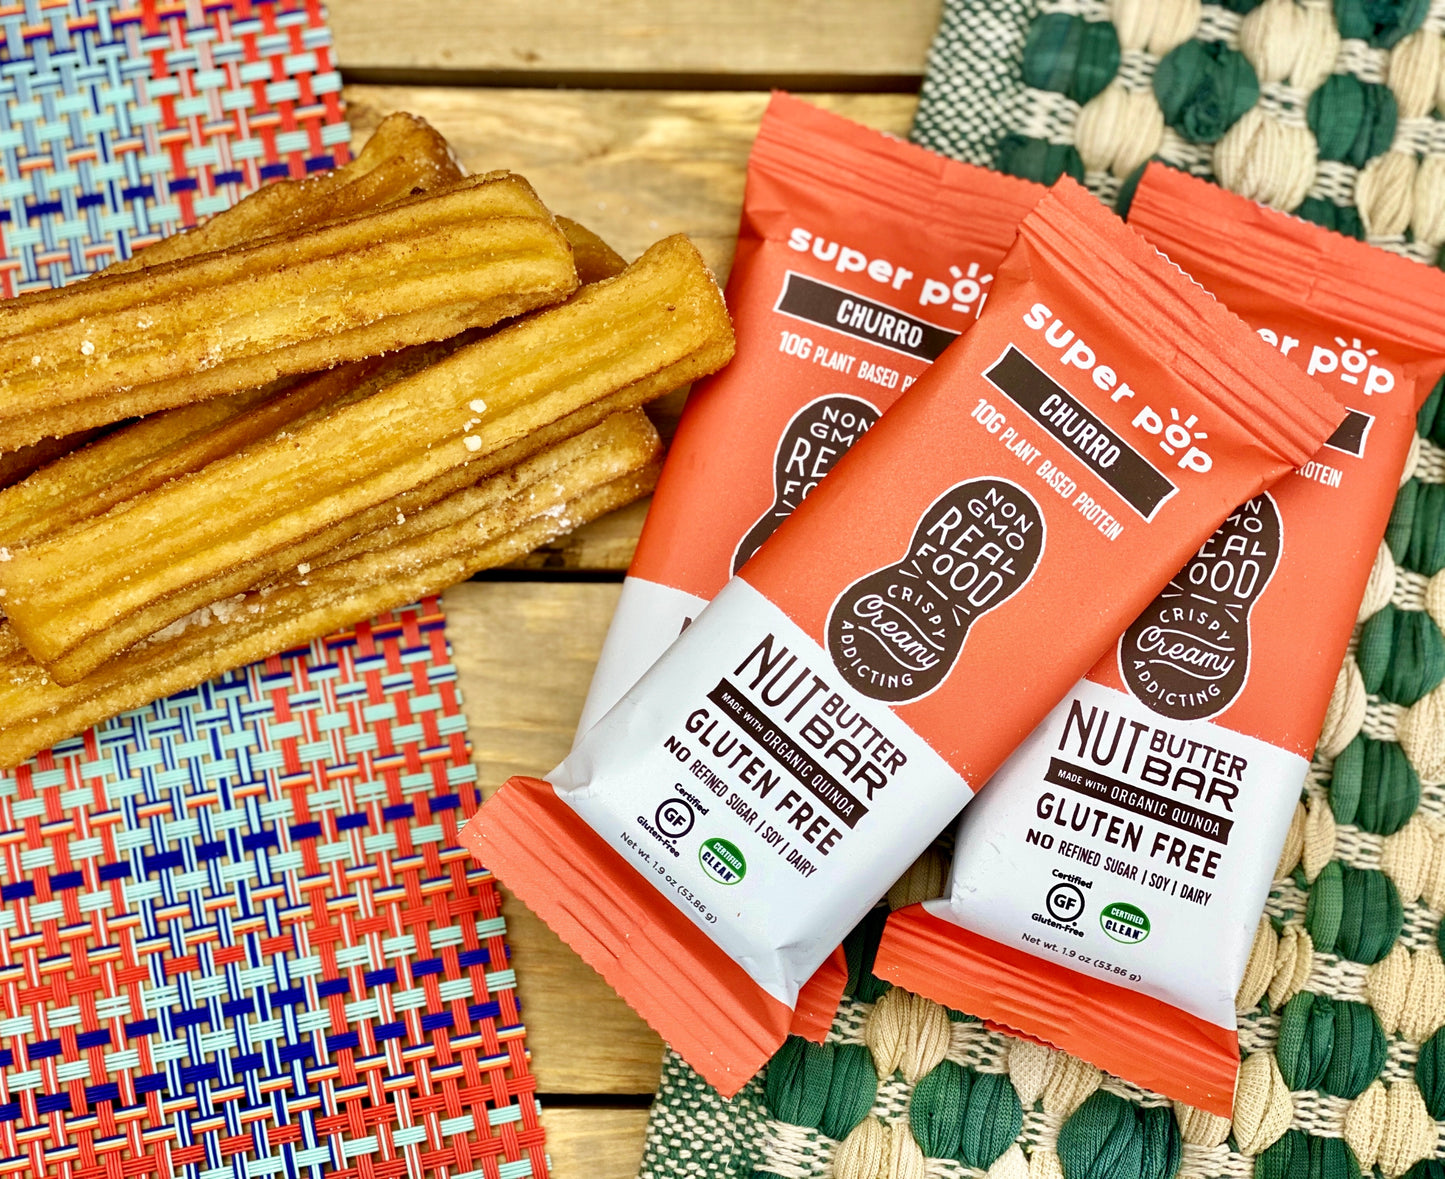 Peanut Butter Churro - 12 Pack (On Sale)